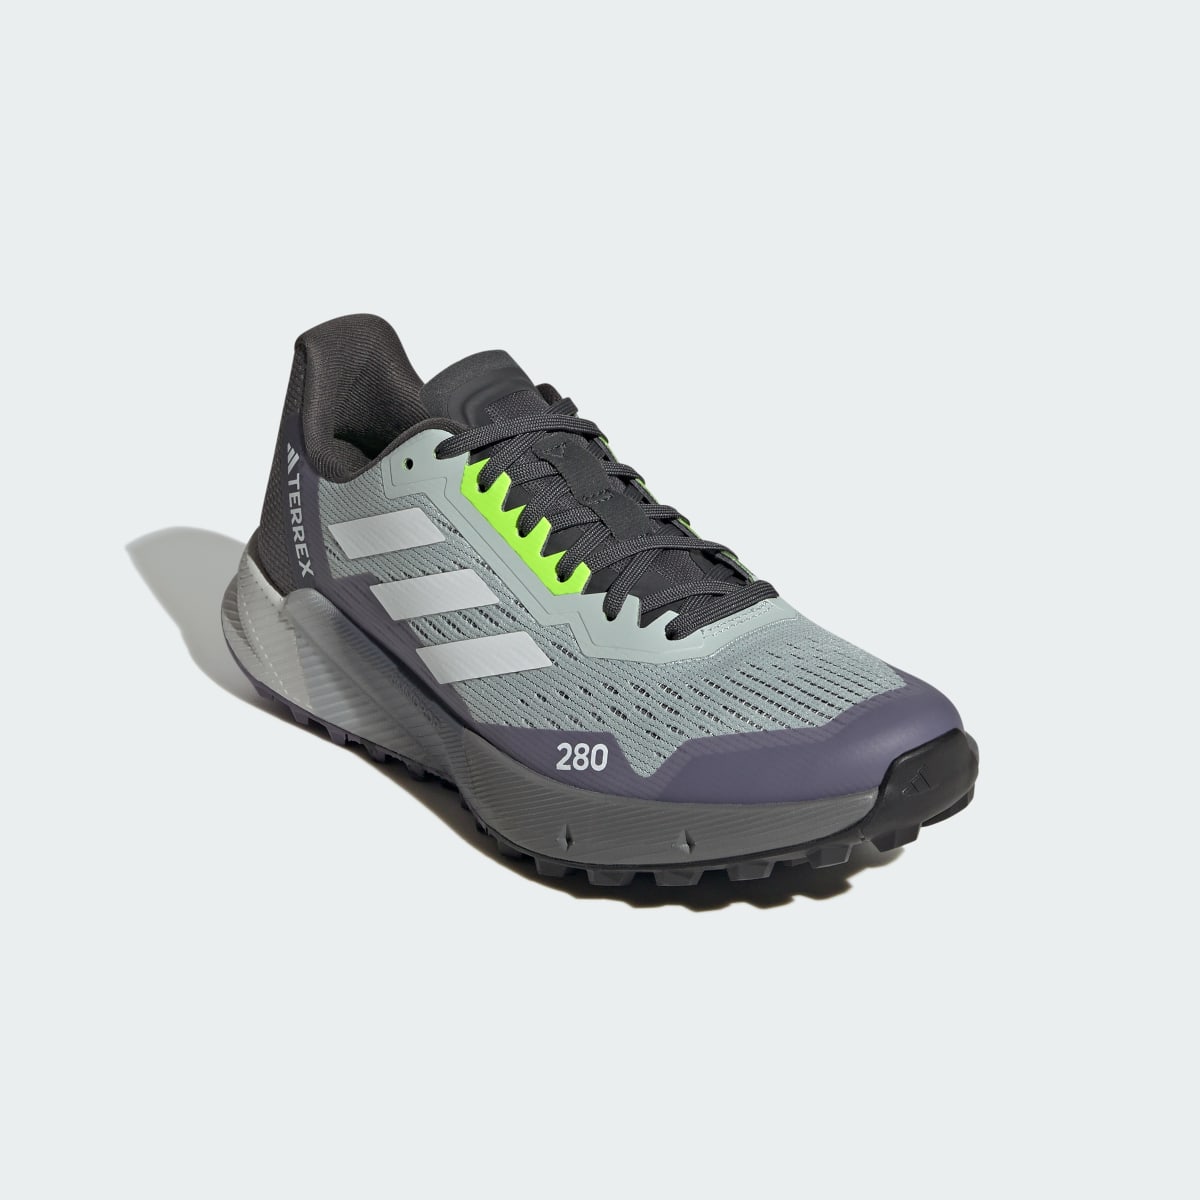 Adidas Terrex Agravic Flow 2.0 Trail Running Shoes. 5